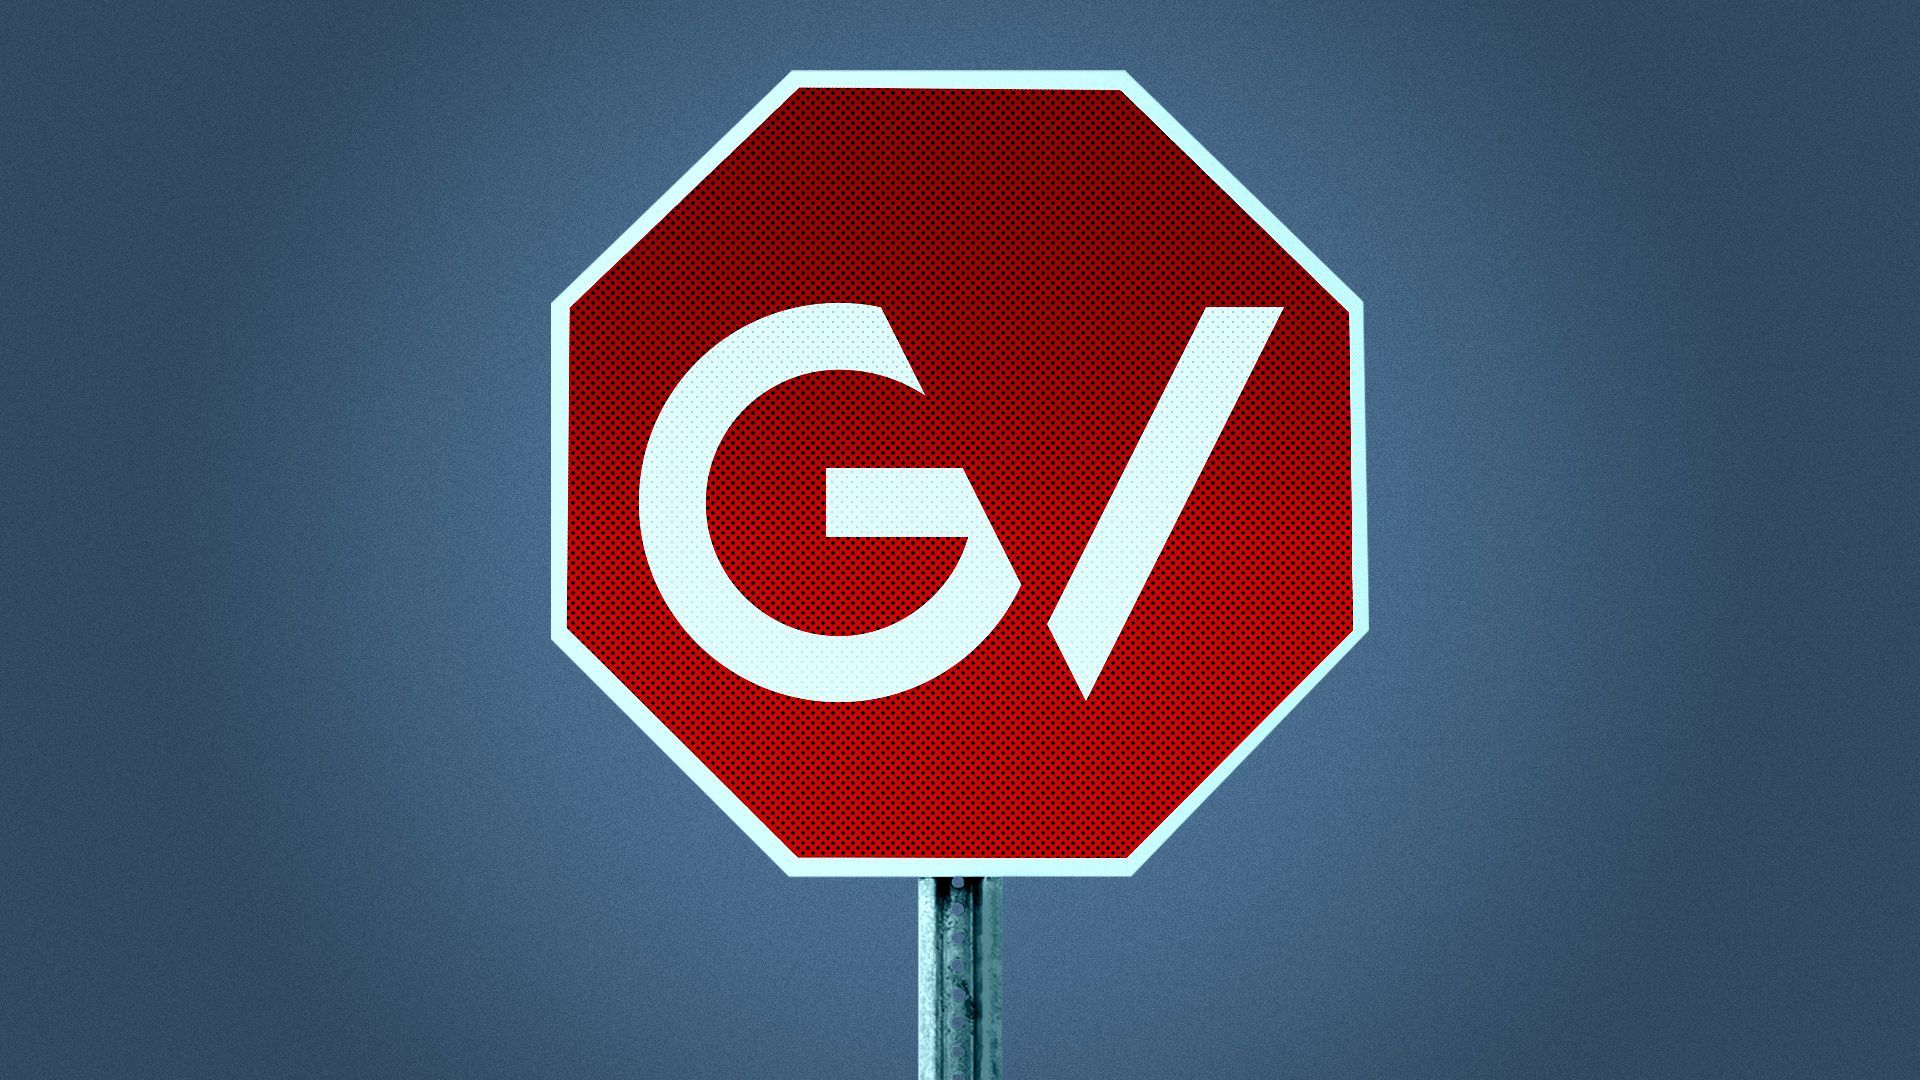 Illustration of a stop sign with Google Ventures' logo.